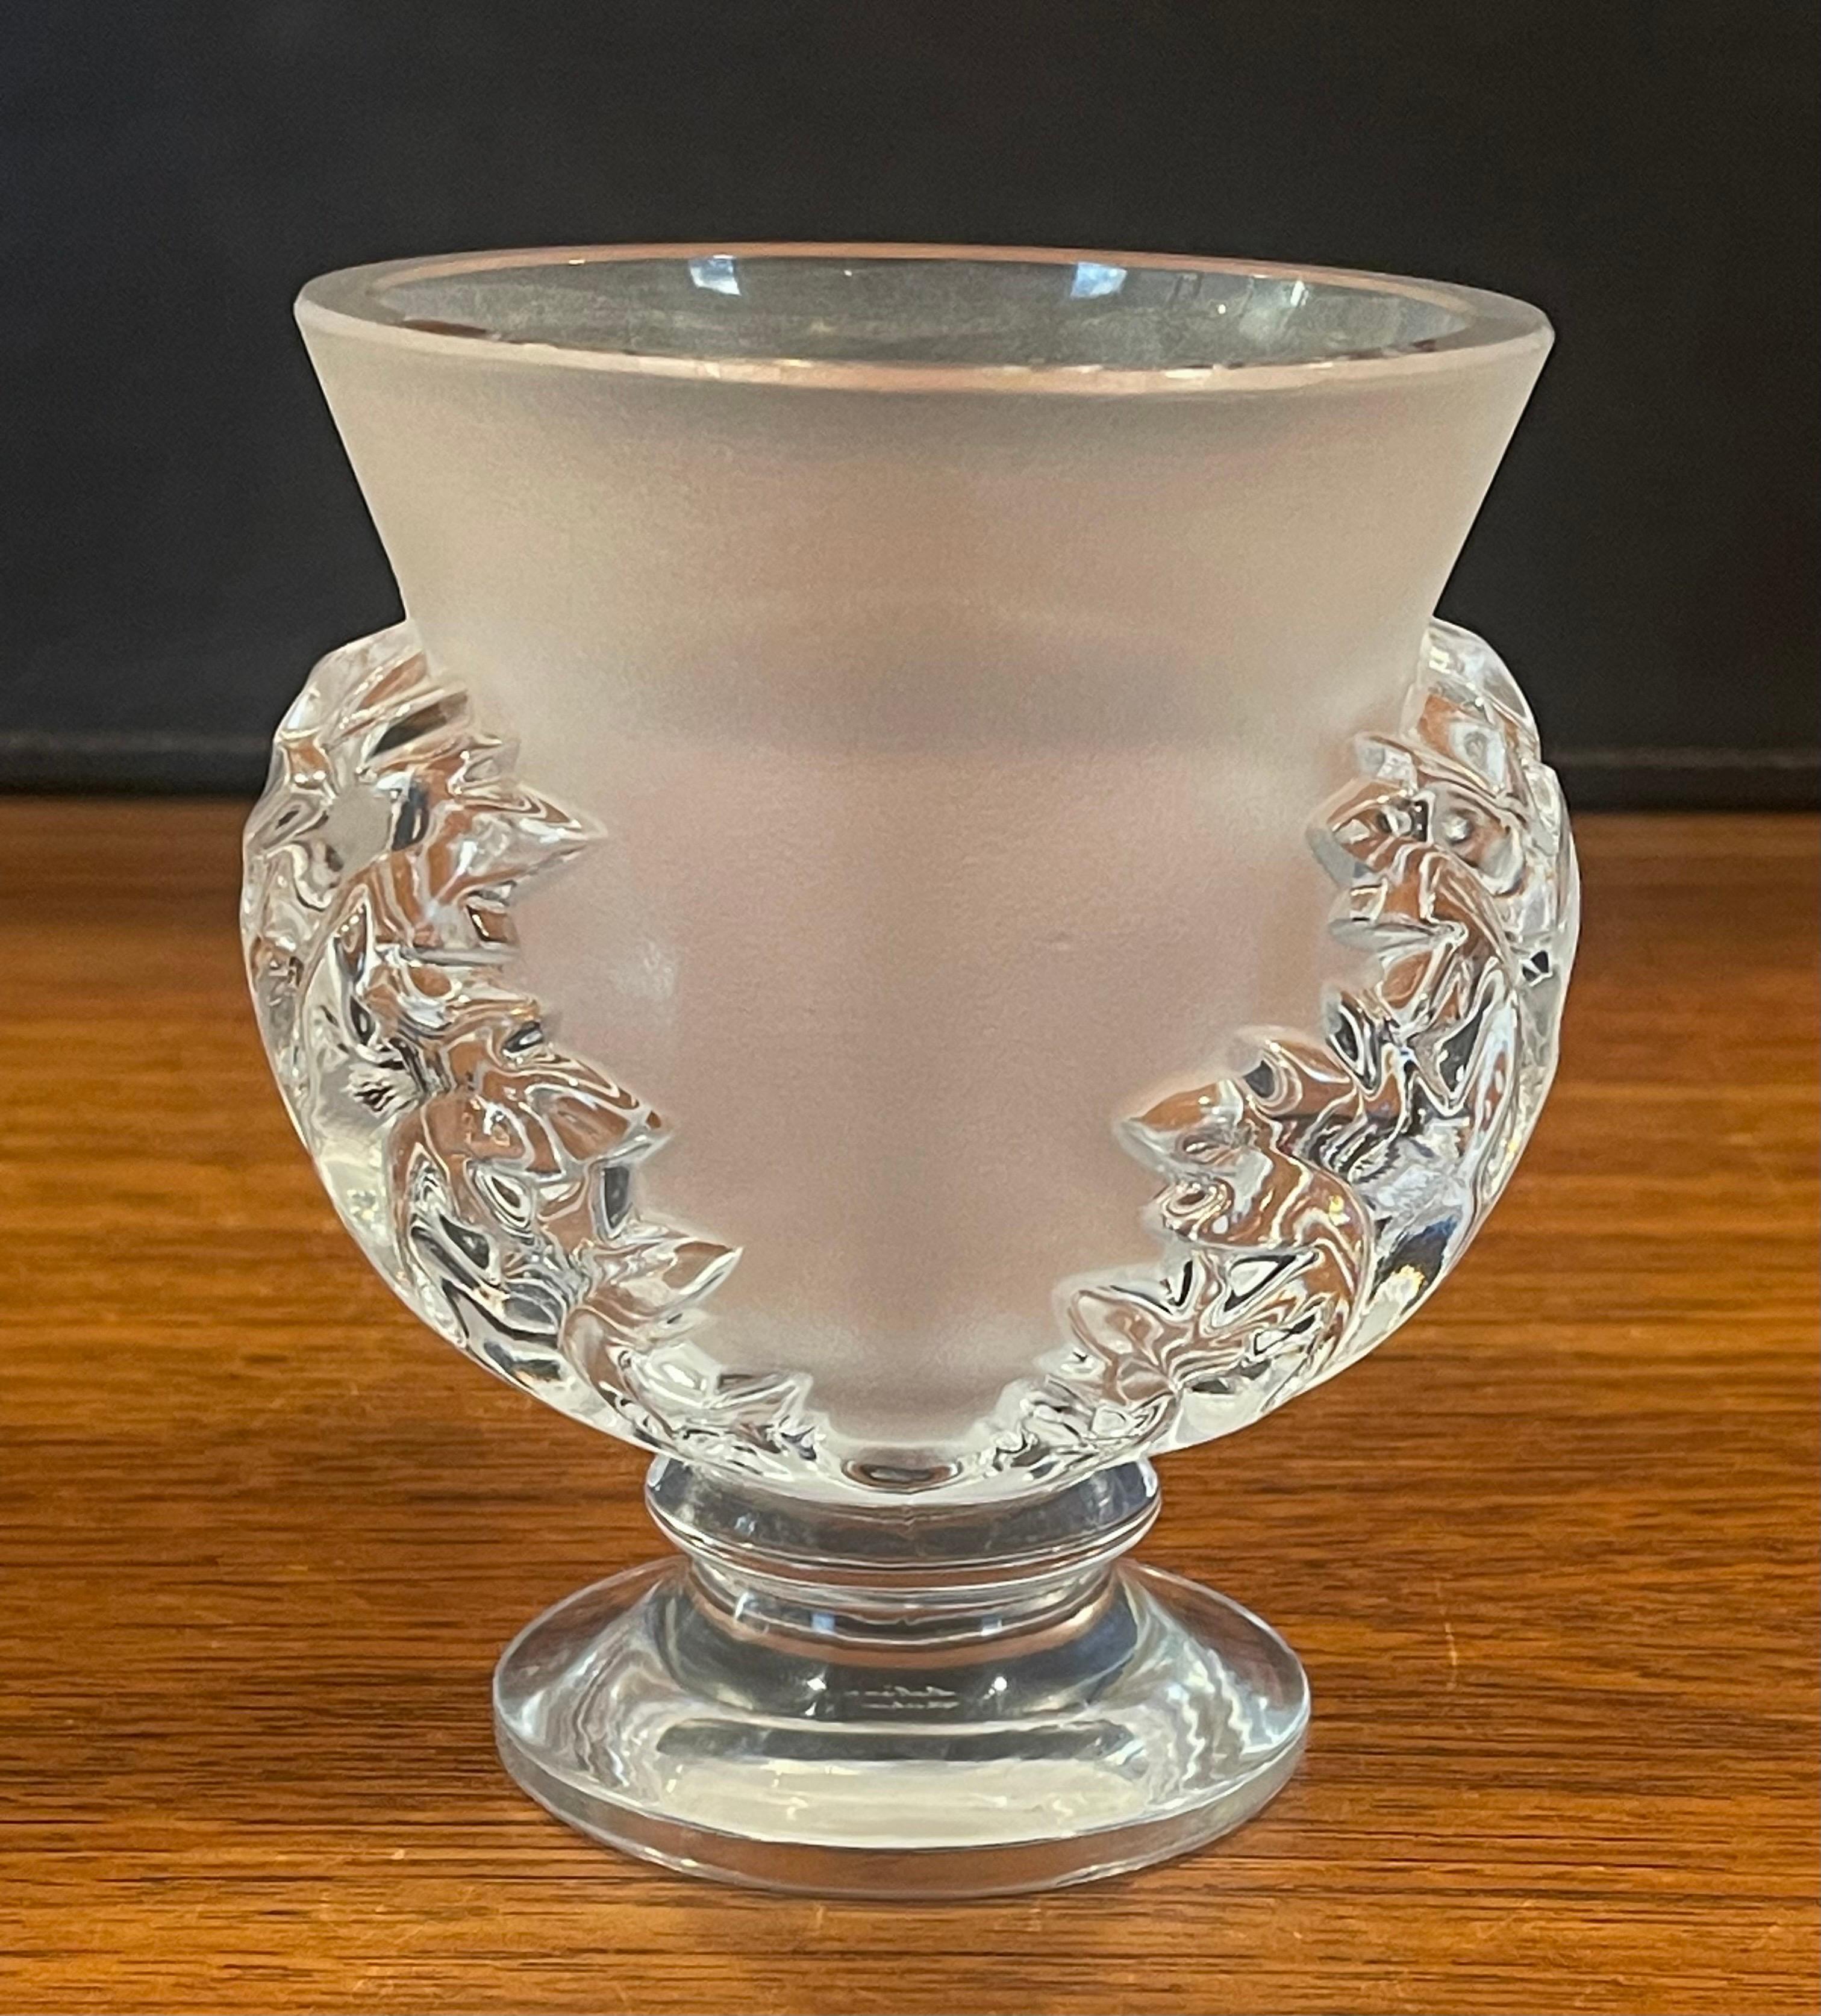 Satin Crystal St. Cloud Vase with Acanthus Leaves by Lalique of France For Sale 1